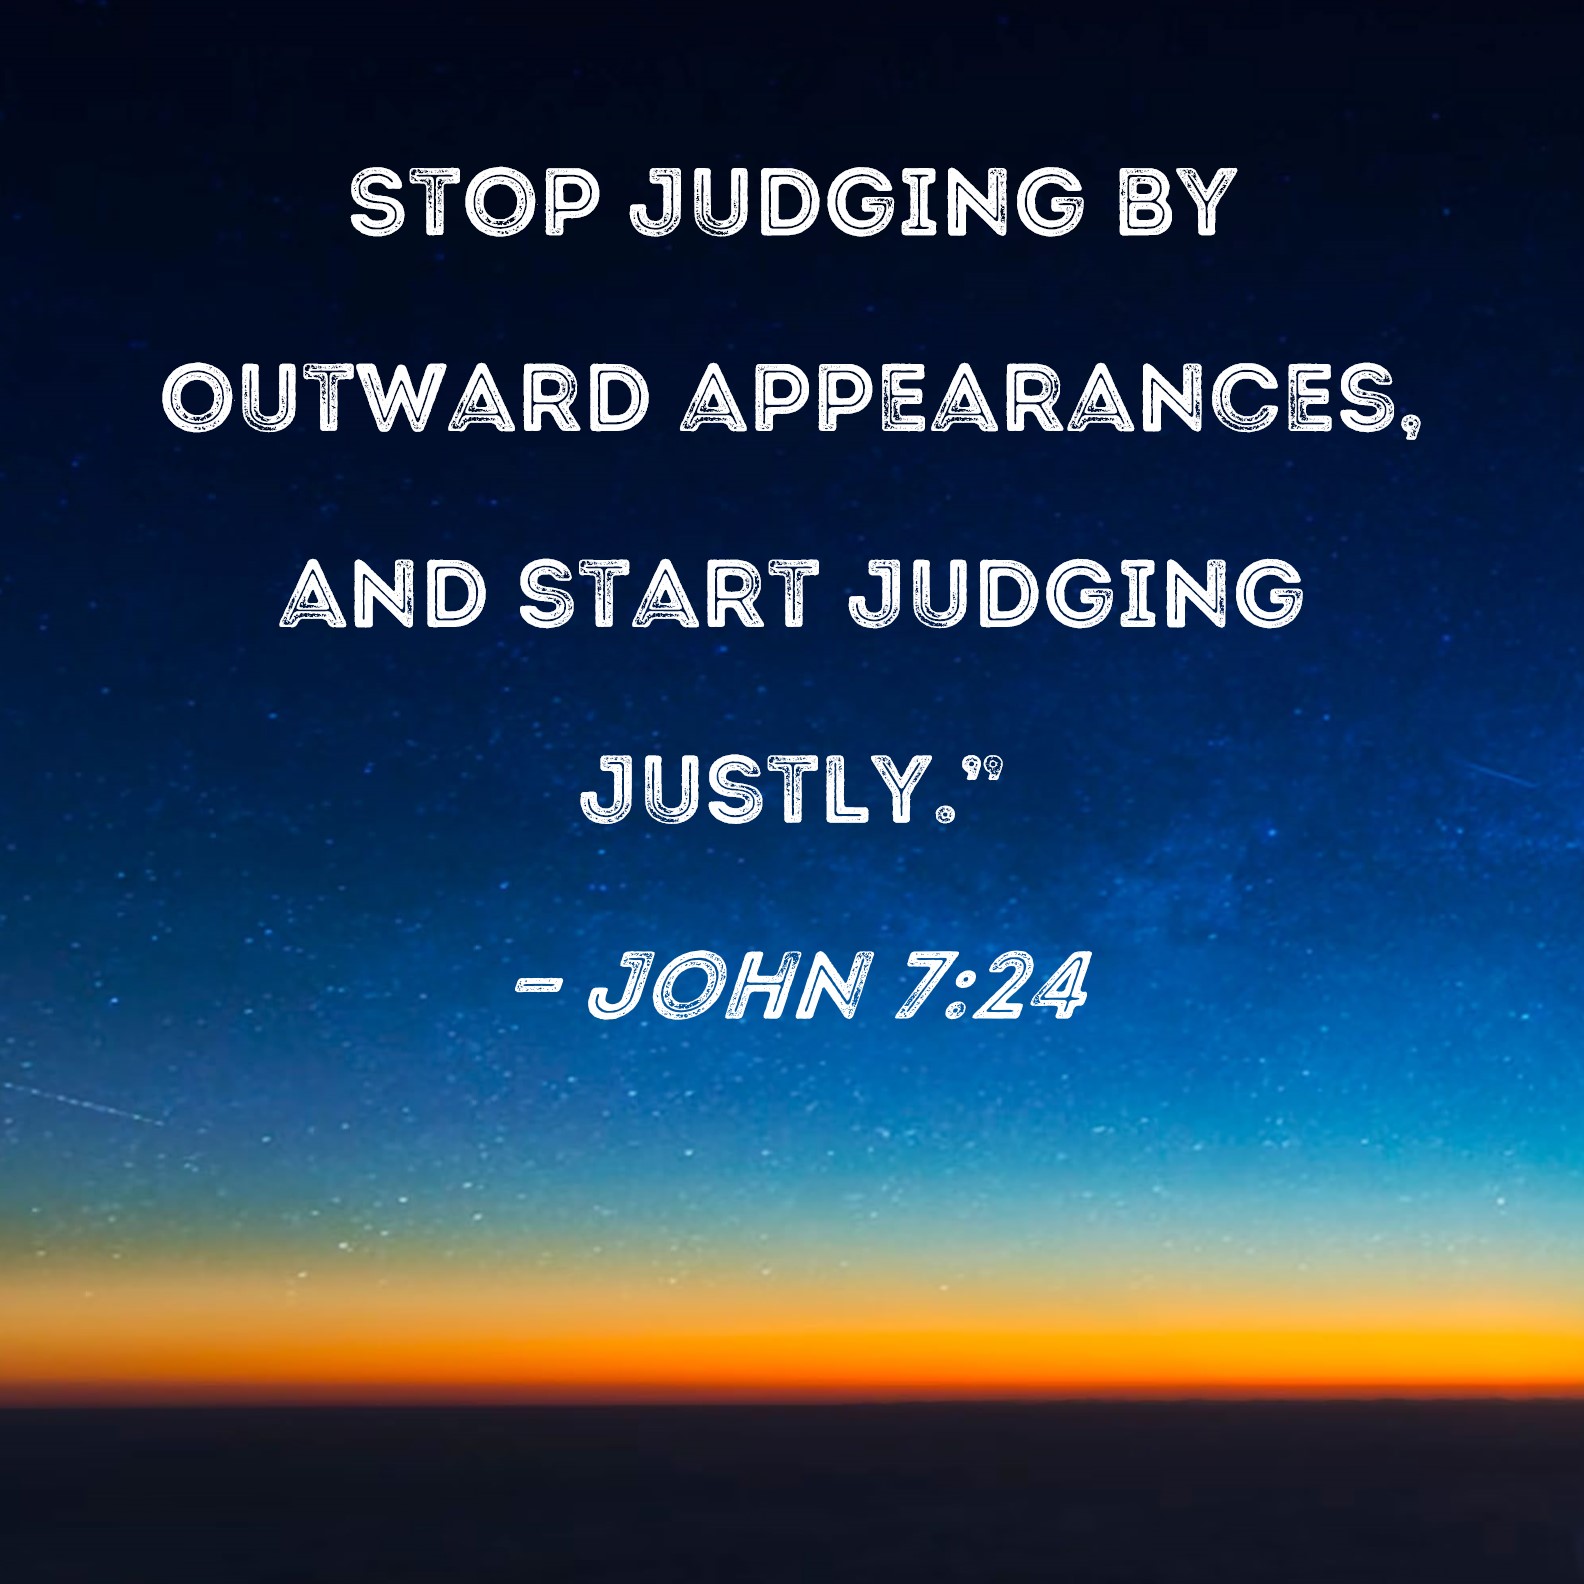 Jesus was clear about judging others